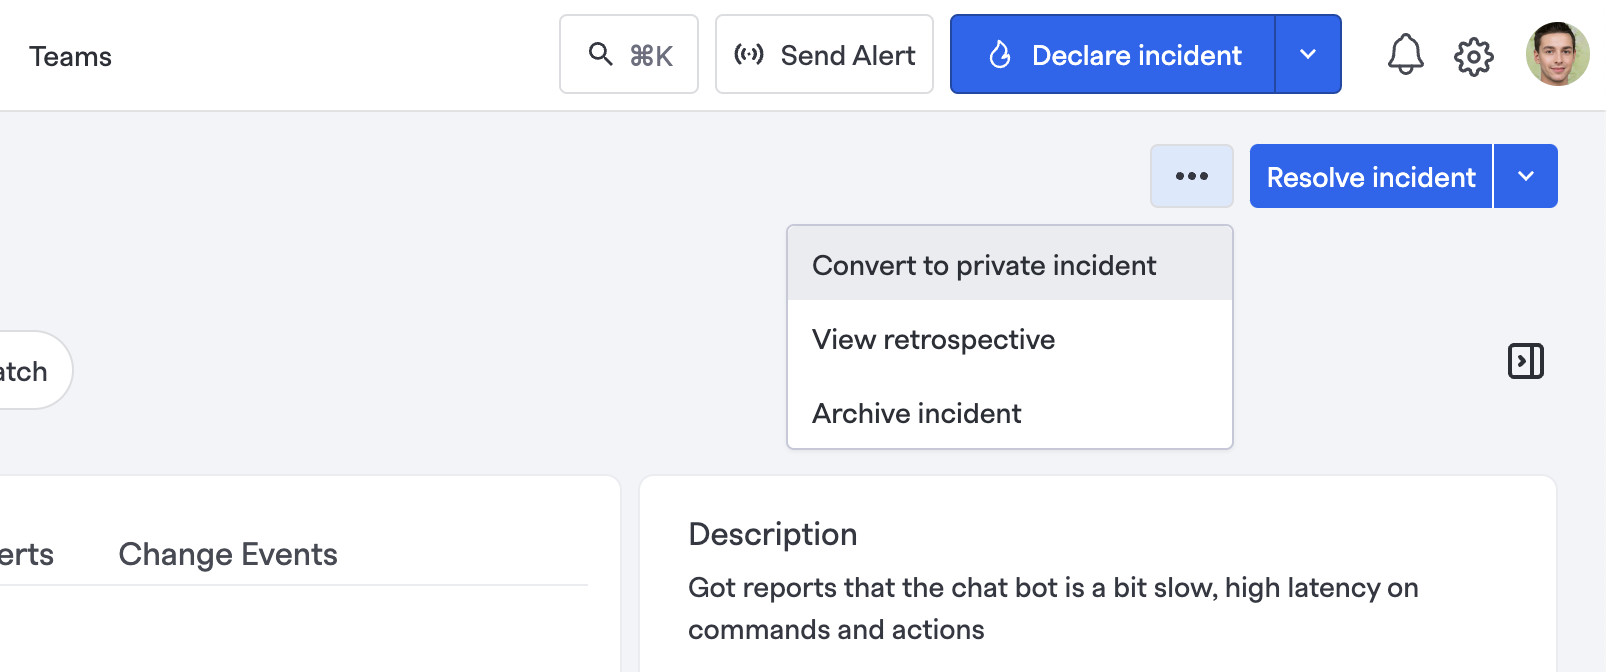 Converting incident privacy in the UI